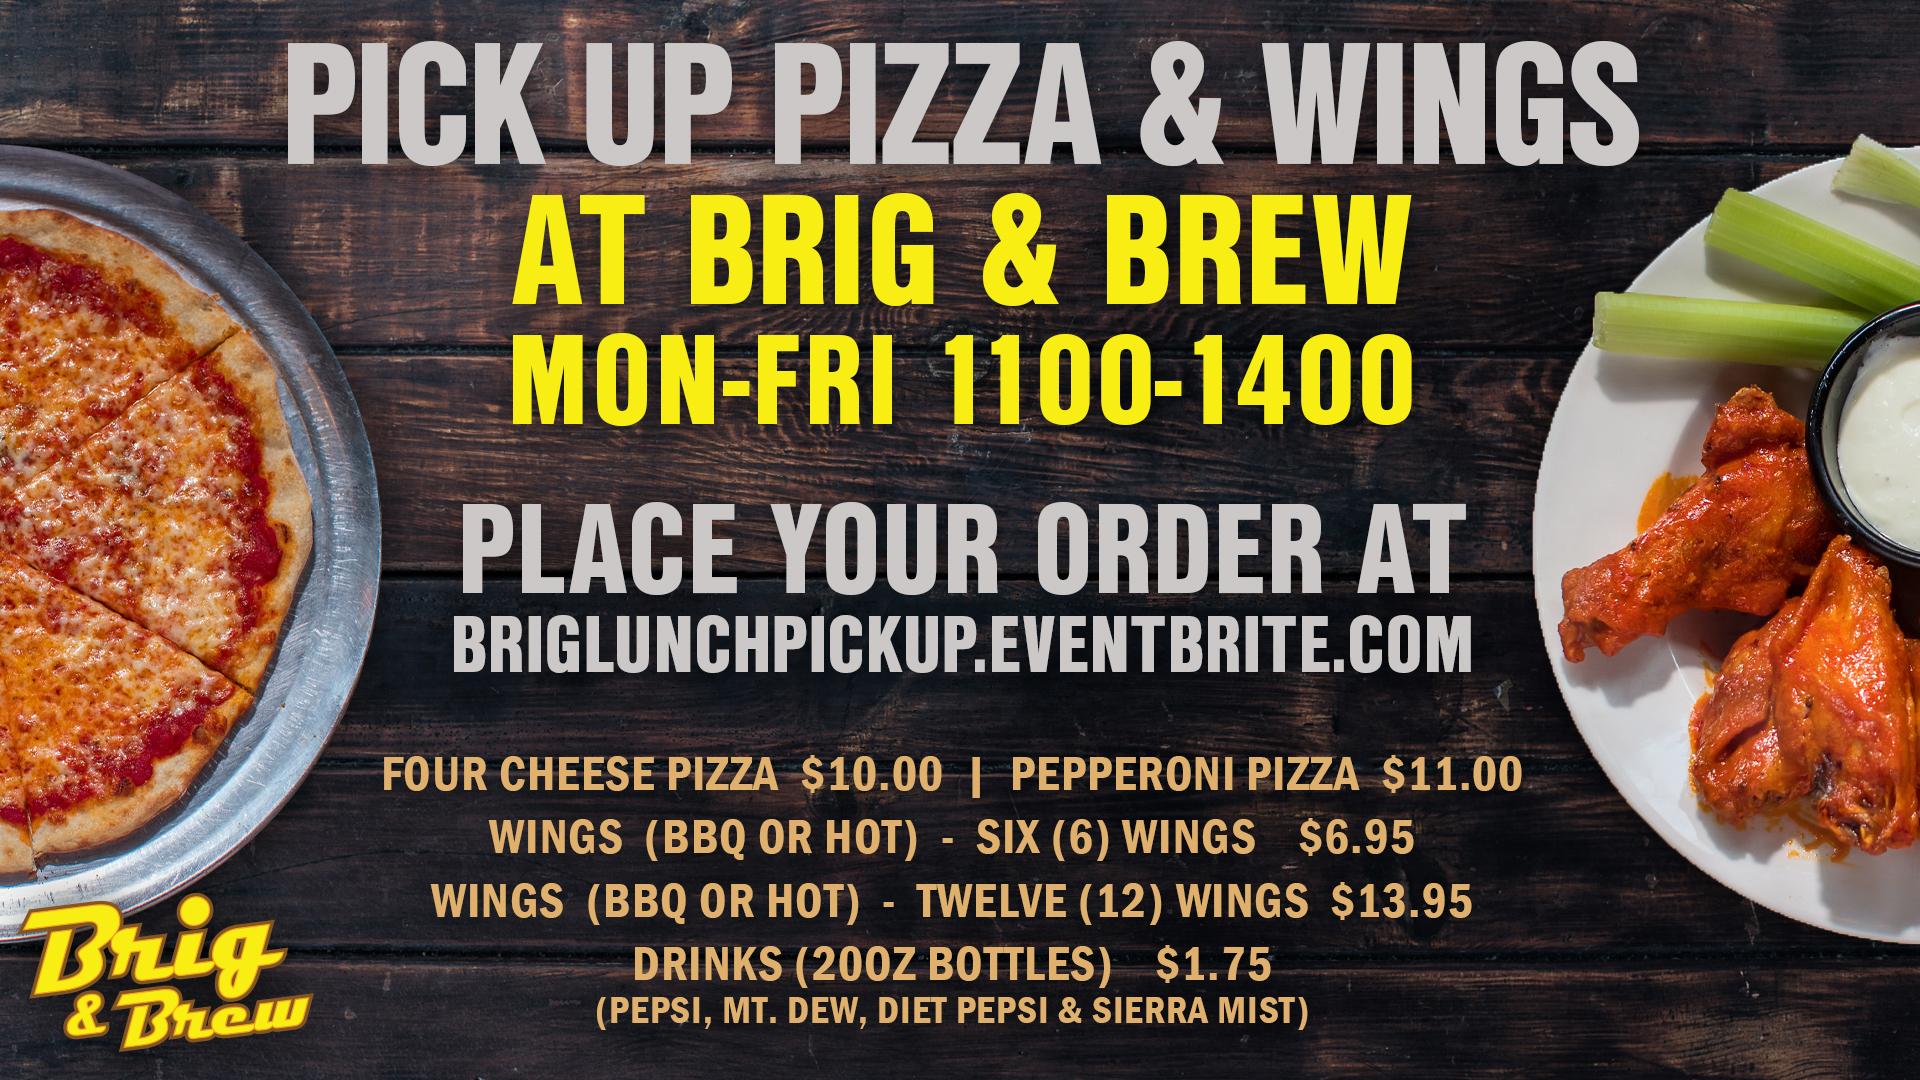 Pick Up Pizza & Wings at Brig and Brew